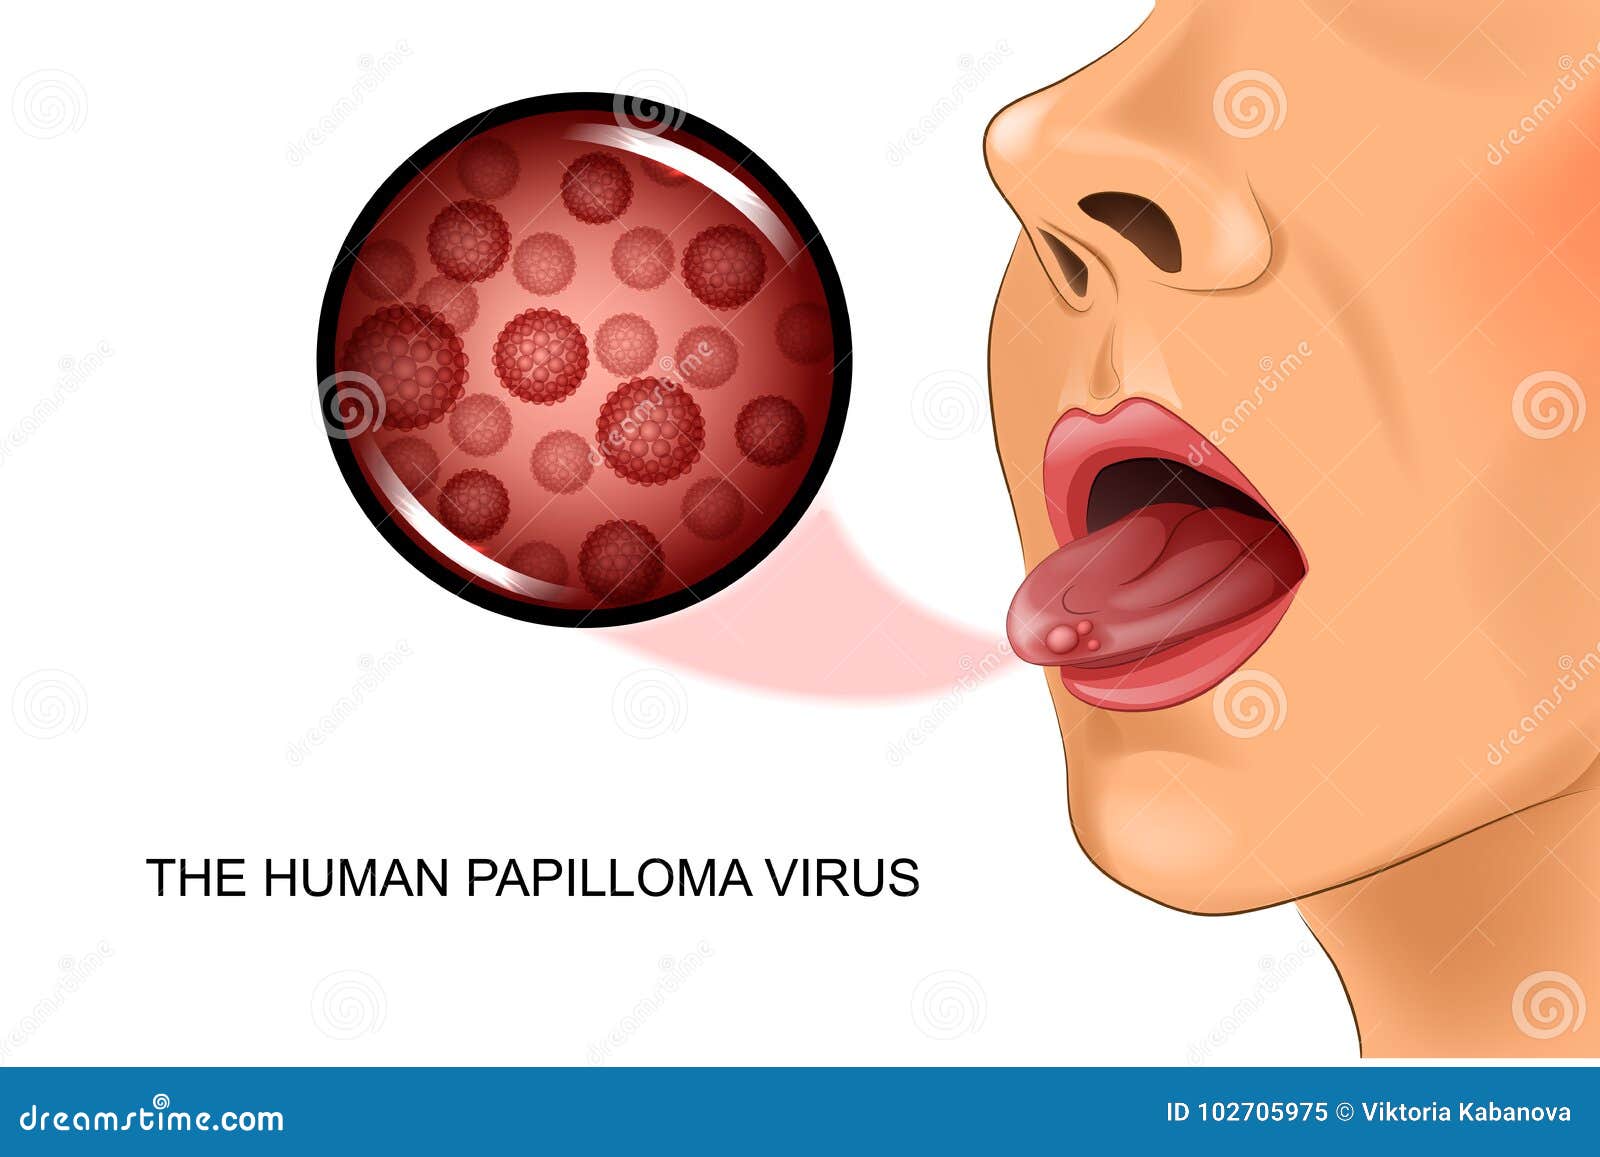 Does hpv cause tongue cancer - Hpv cause tongue cancer